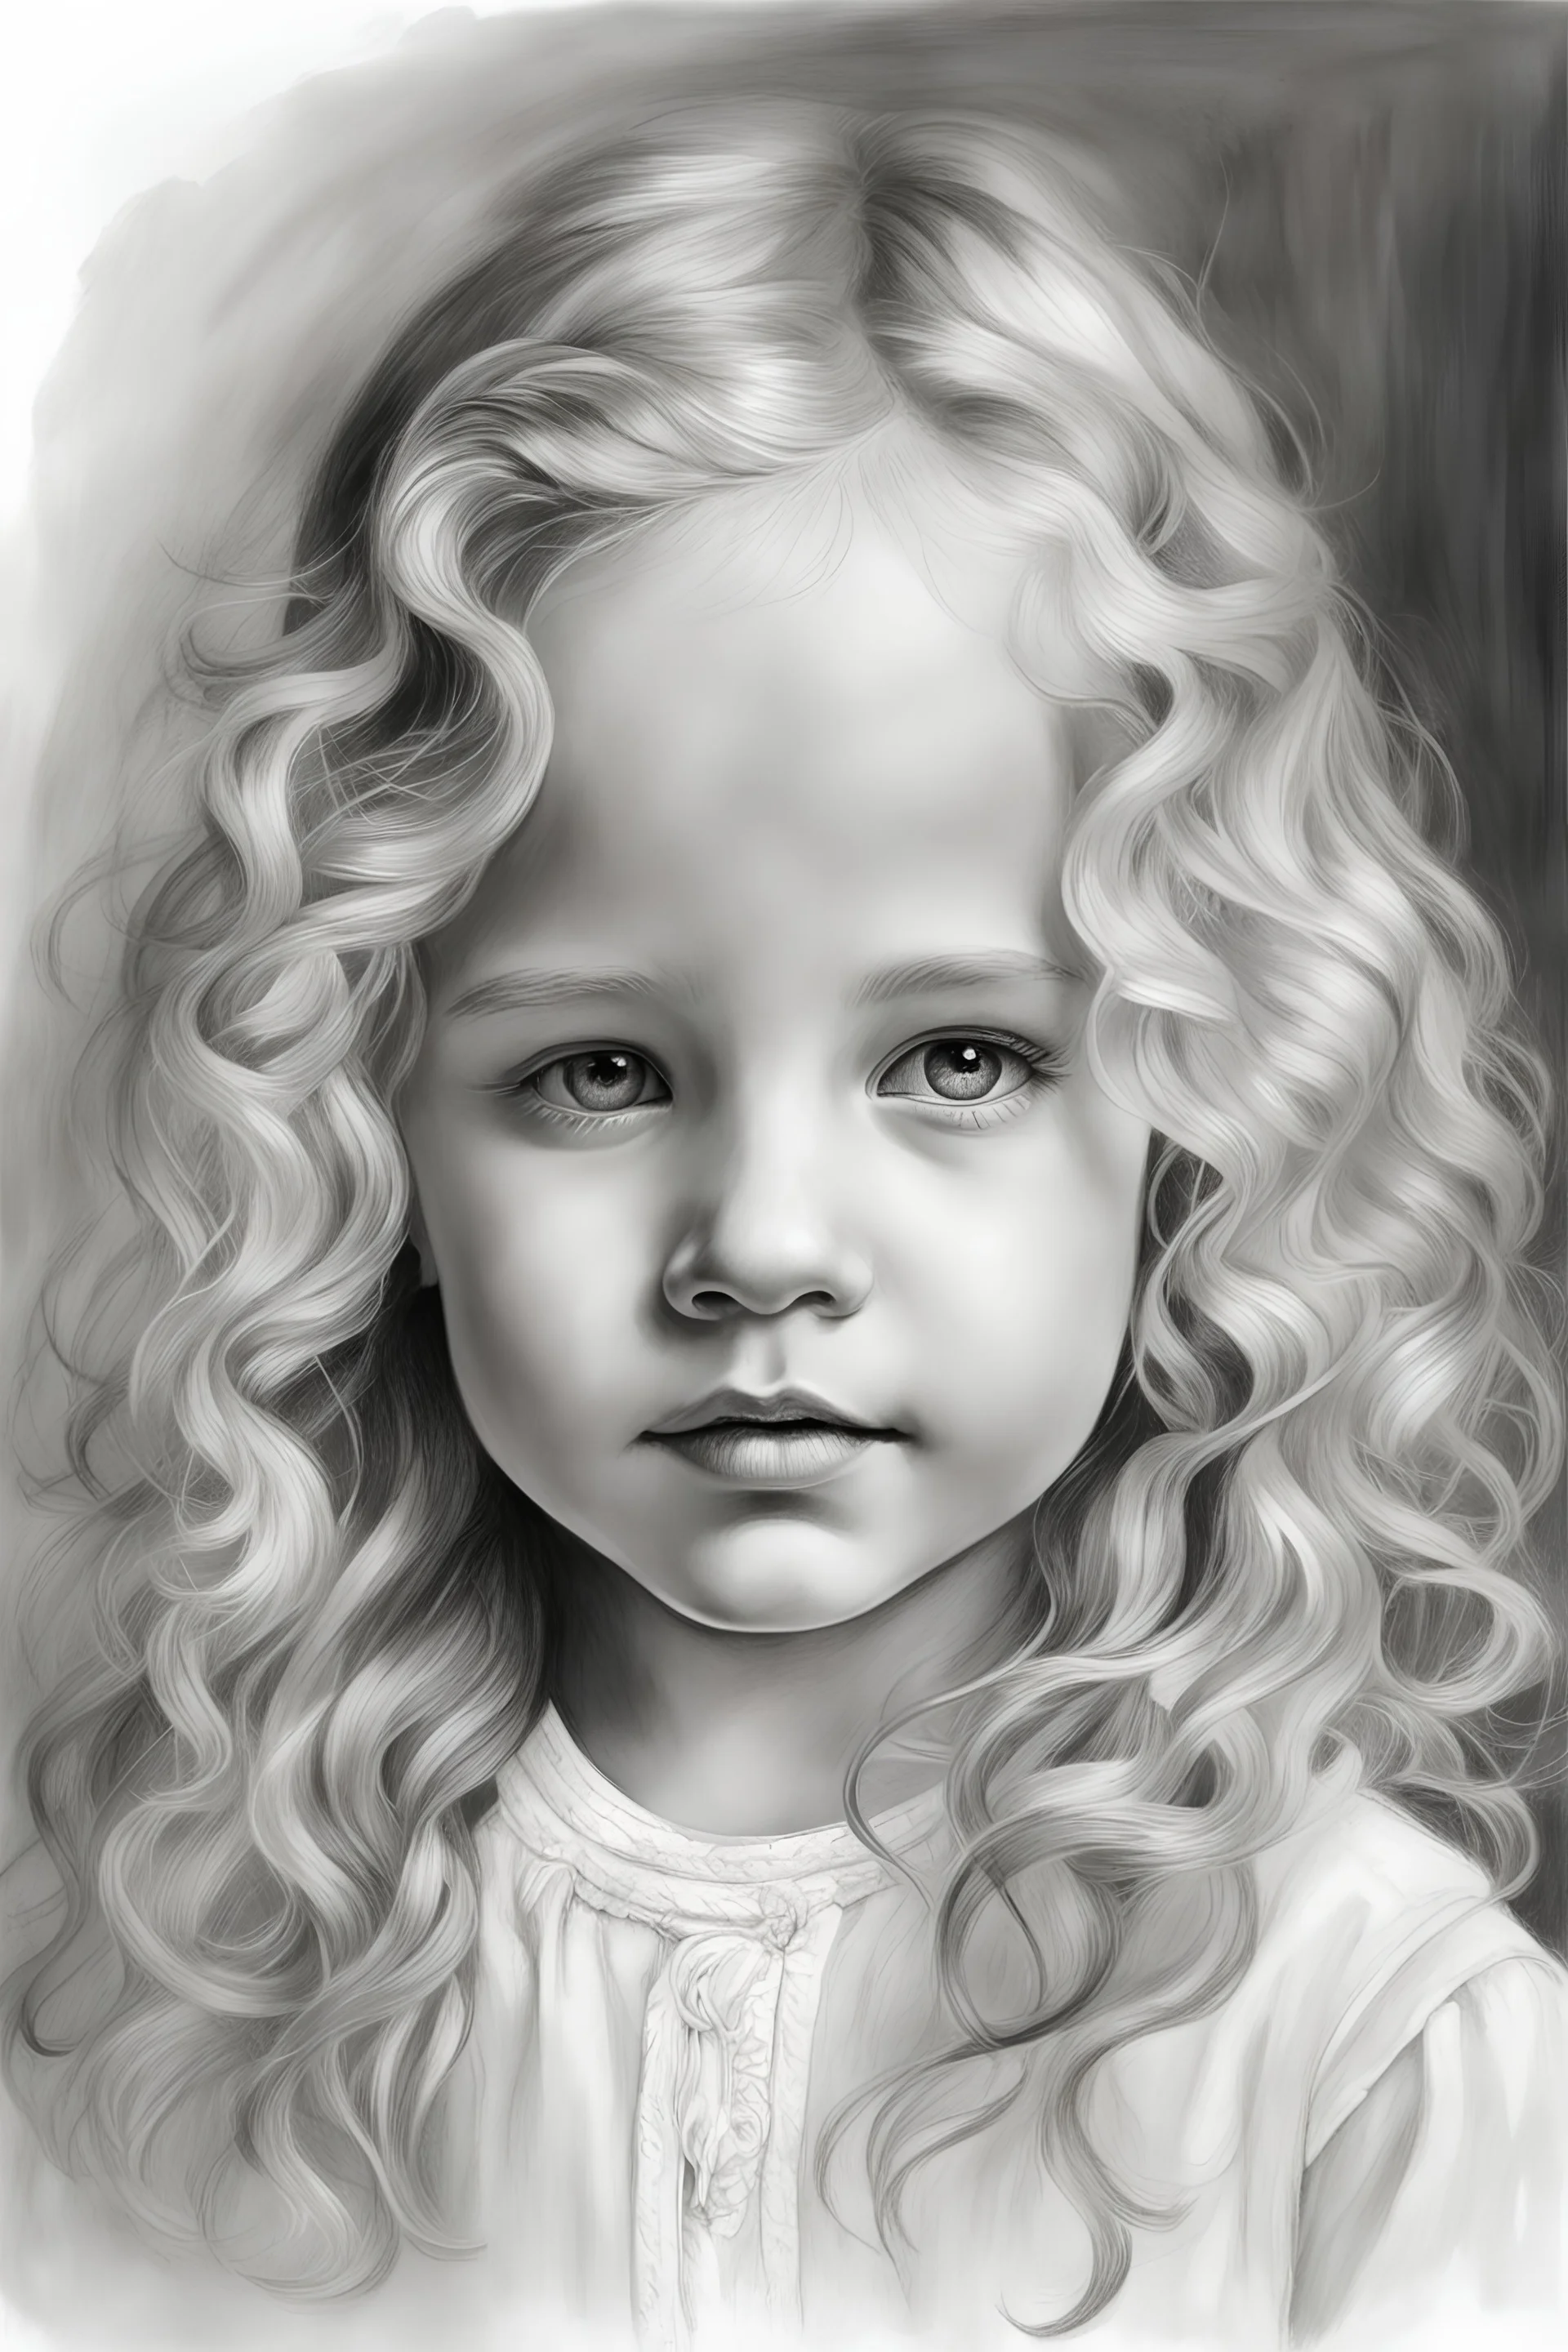 Graphite Pencil drawing, portrait of a little girl, long blonde curly hair, sketch, sketch drawing, hash drawing, sketch style, drawing, beautiful face, perfect eyes, monochromatic, white background